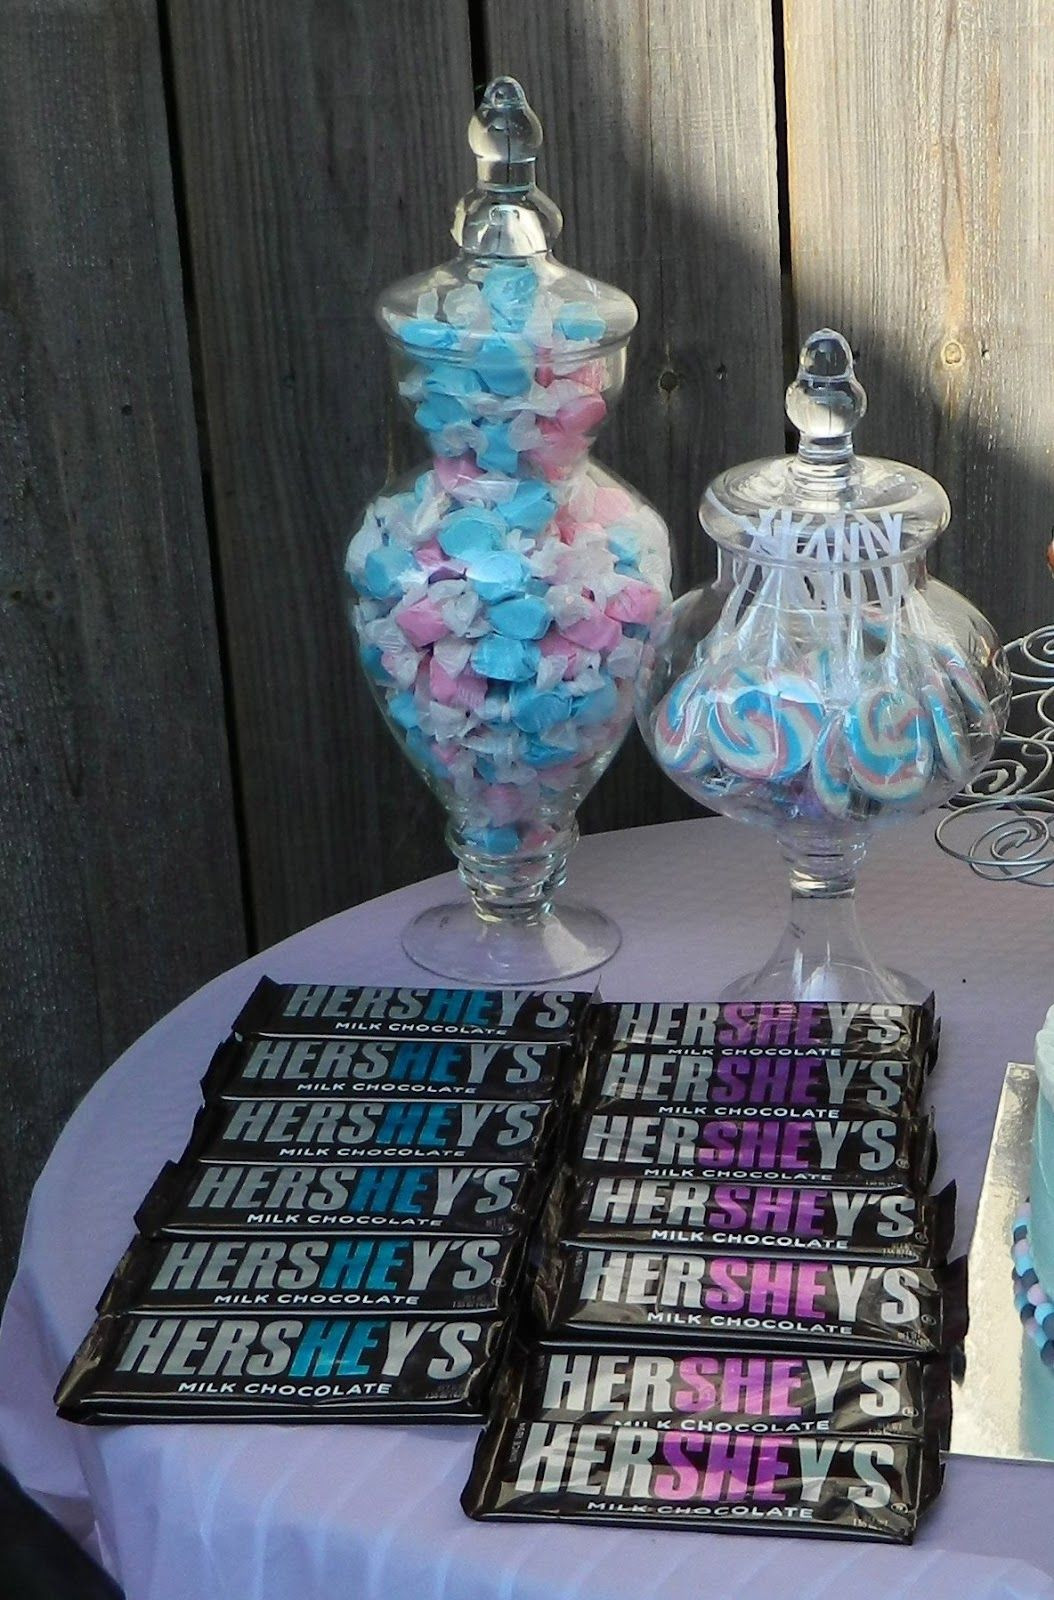 Gift Ideas For Baby Gender Reveal Party
 Decorations for a Gender Reveal Party or a Baby Shower